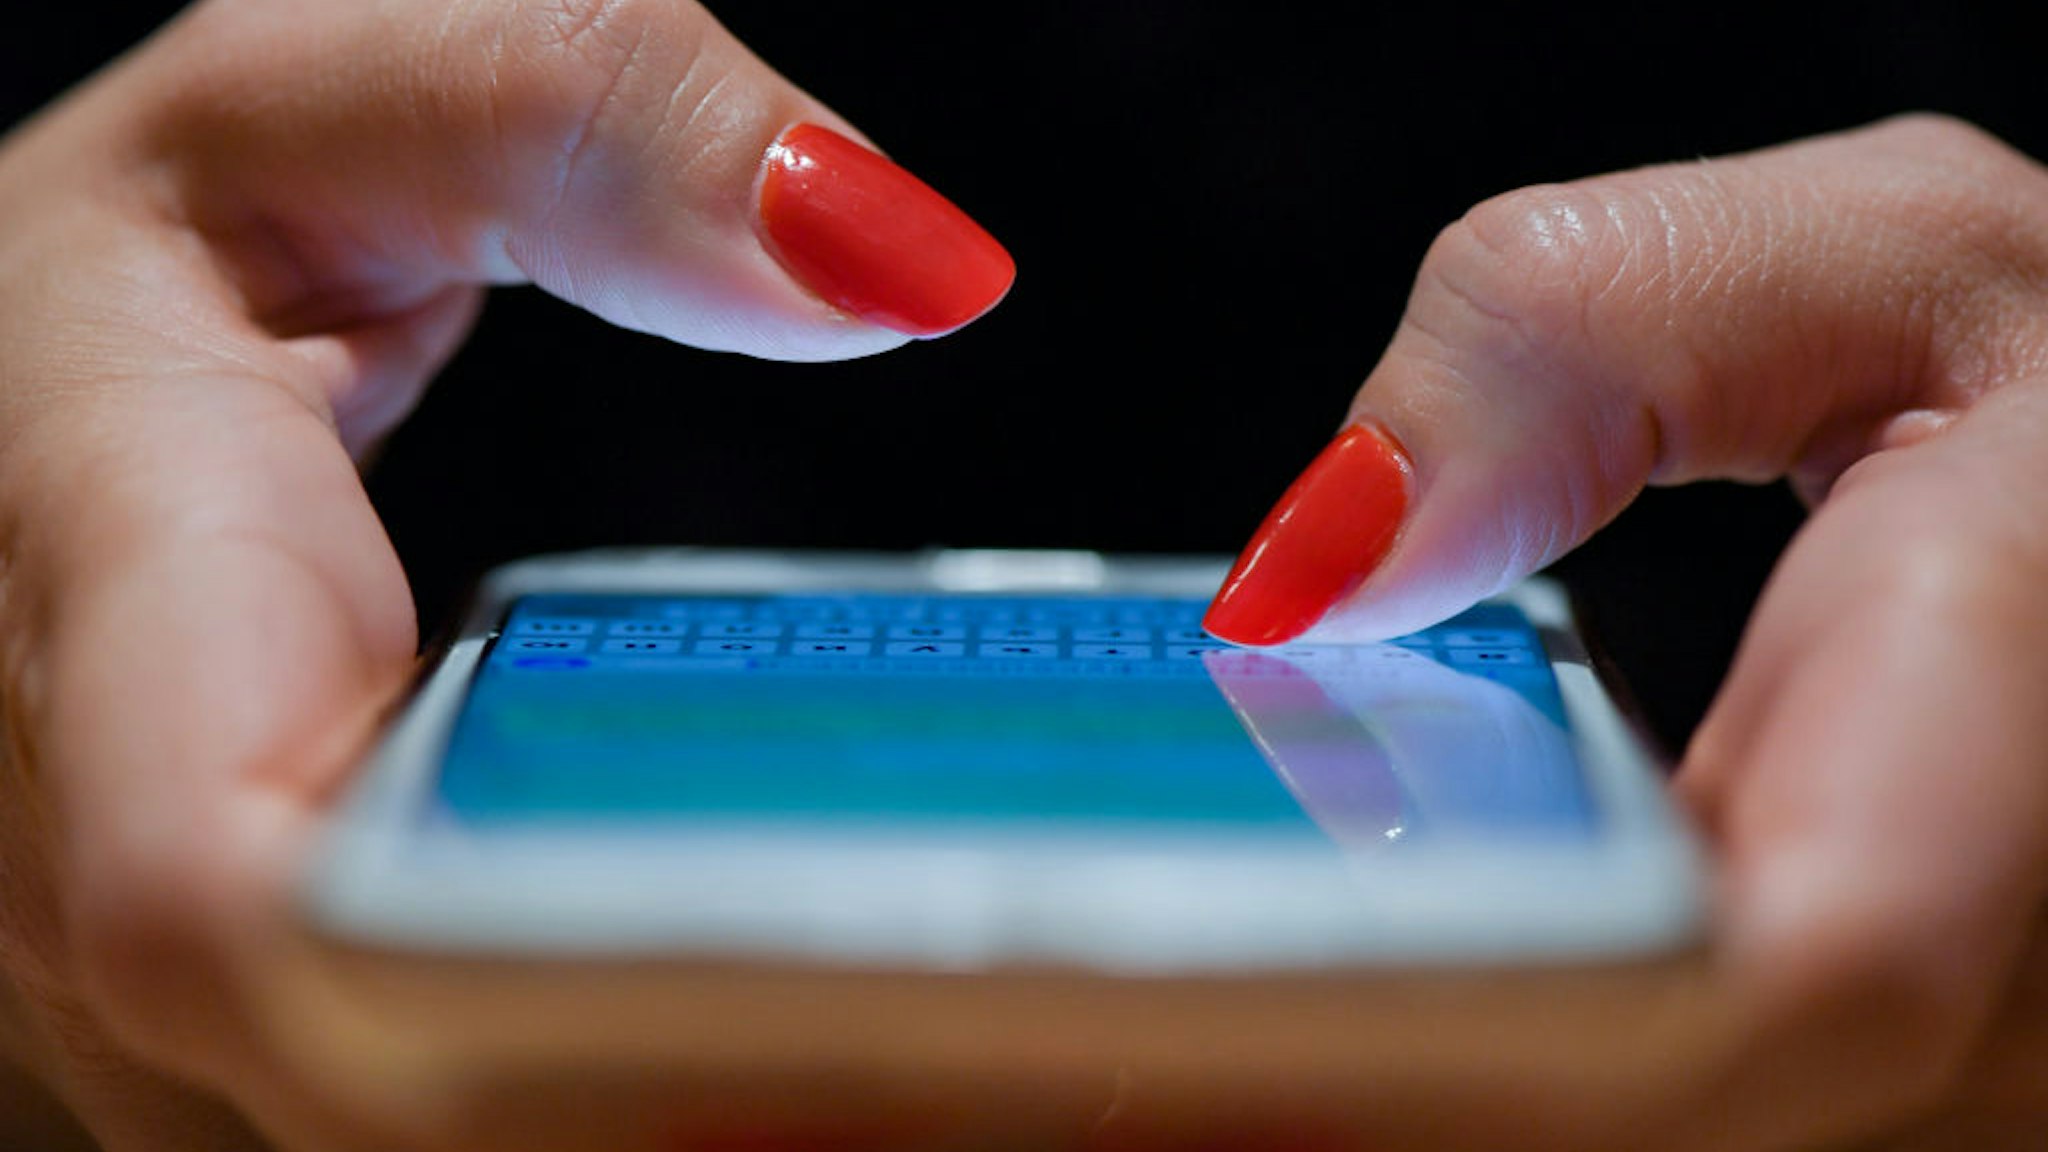 A woman with red fingernails writes a message on her smartphone.